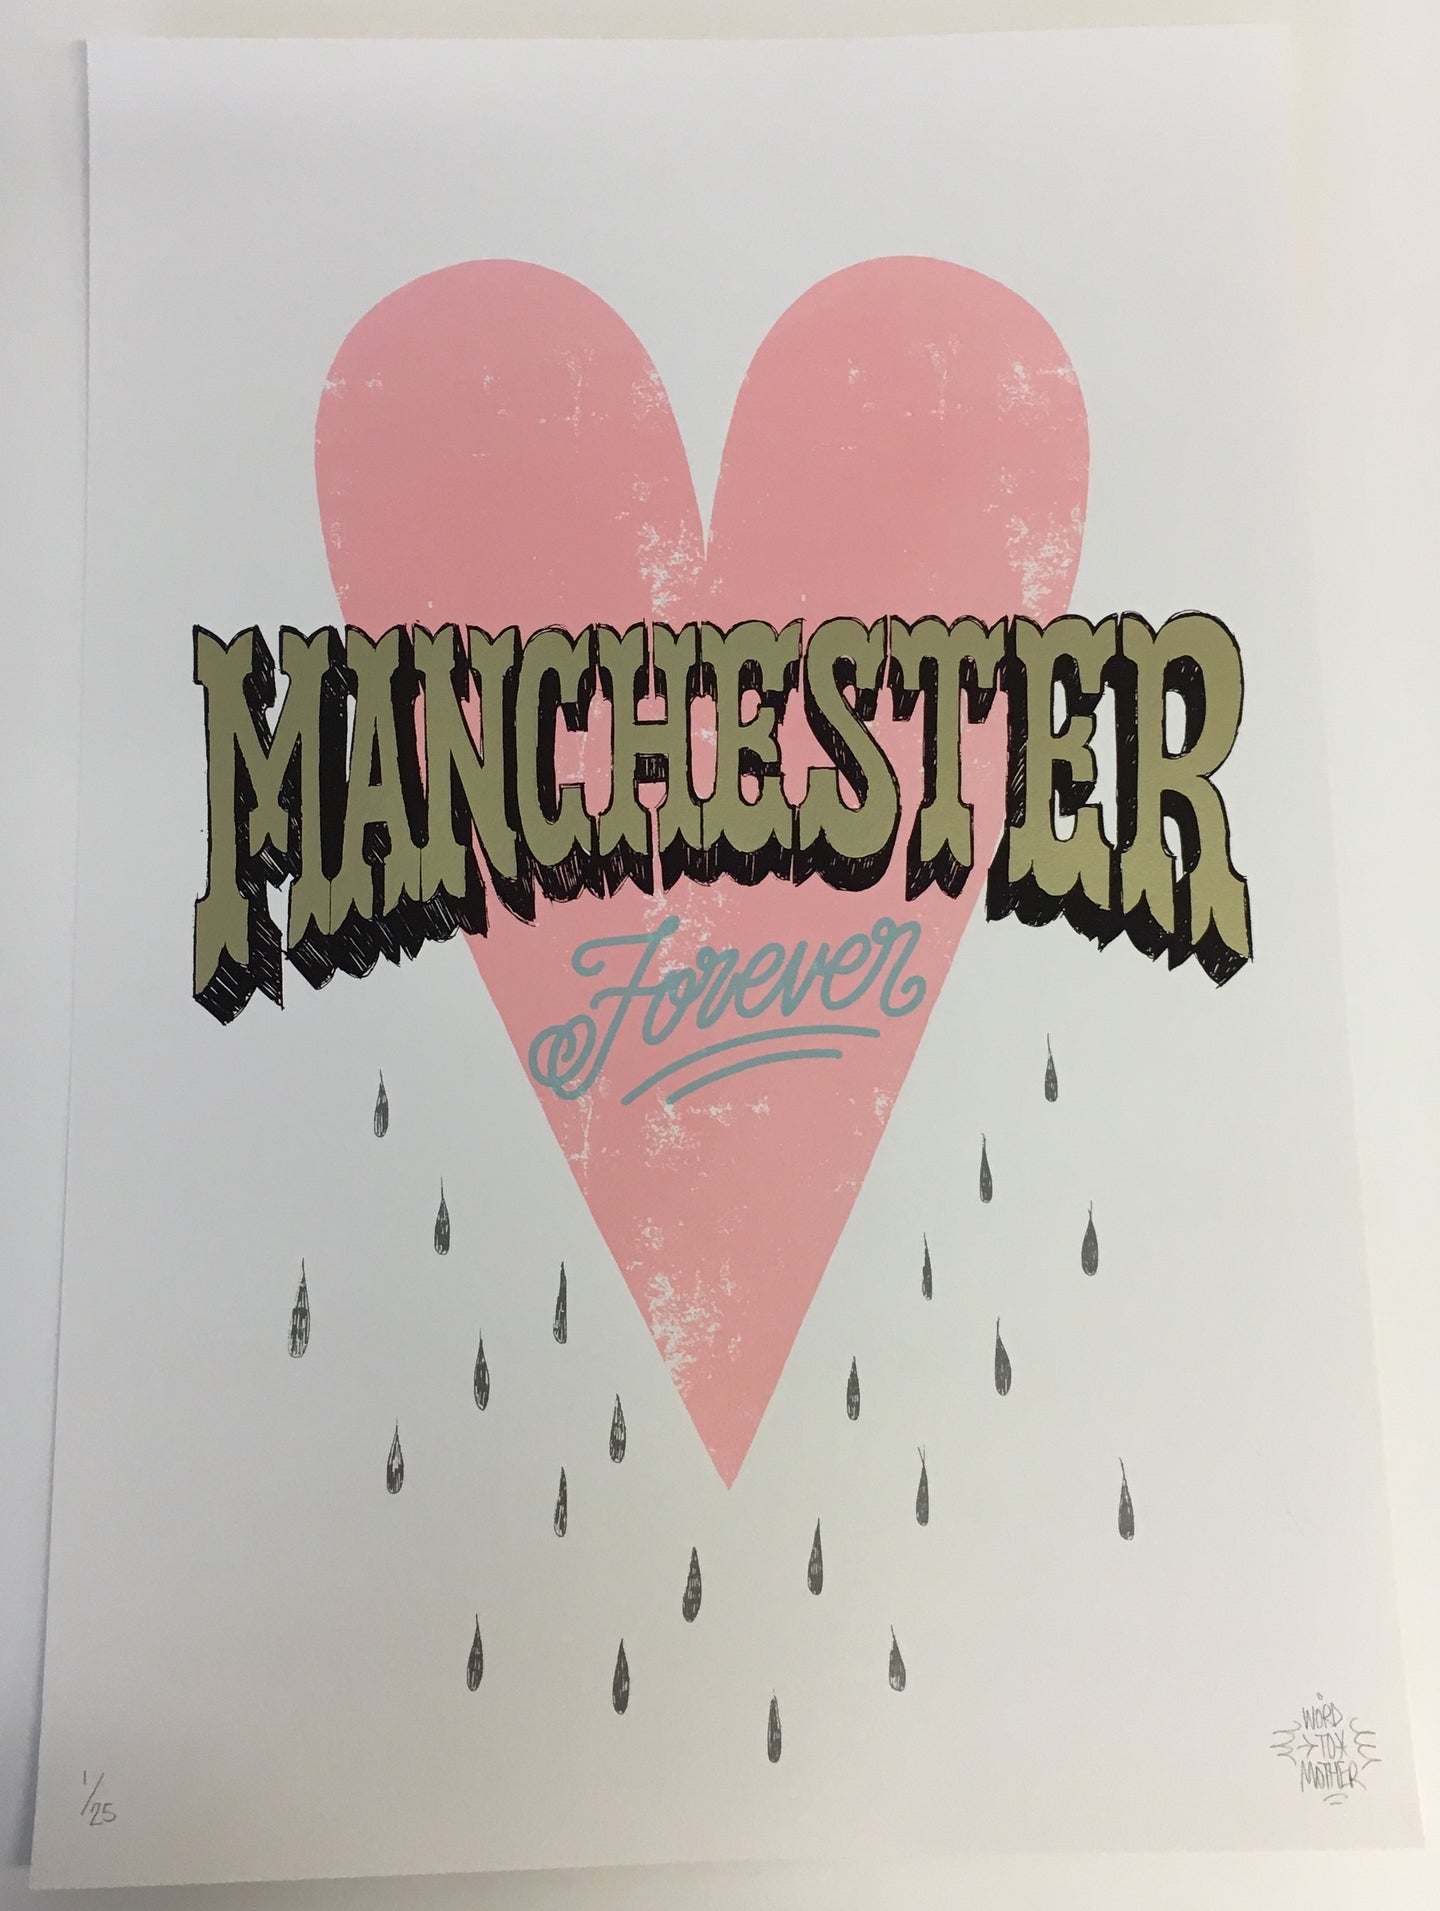 Word to Mother, Manchester Forever print